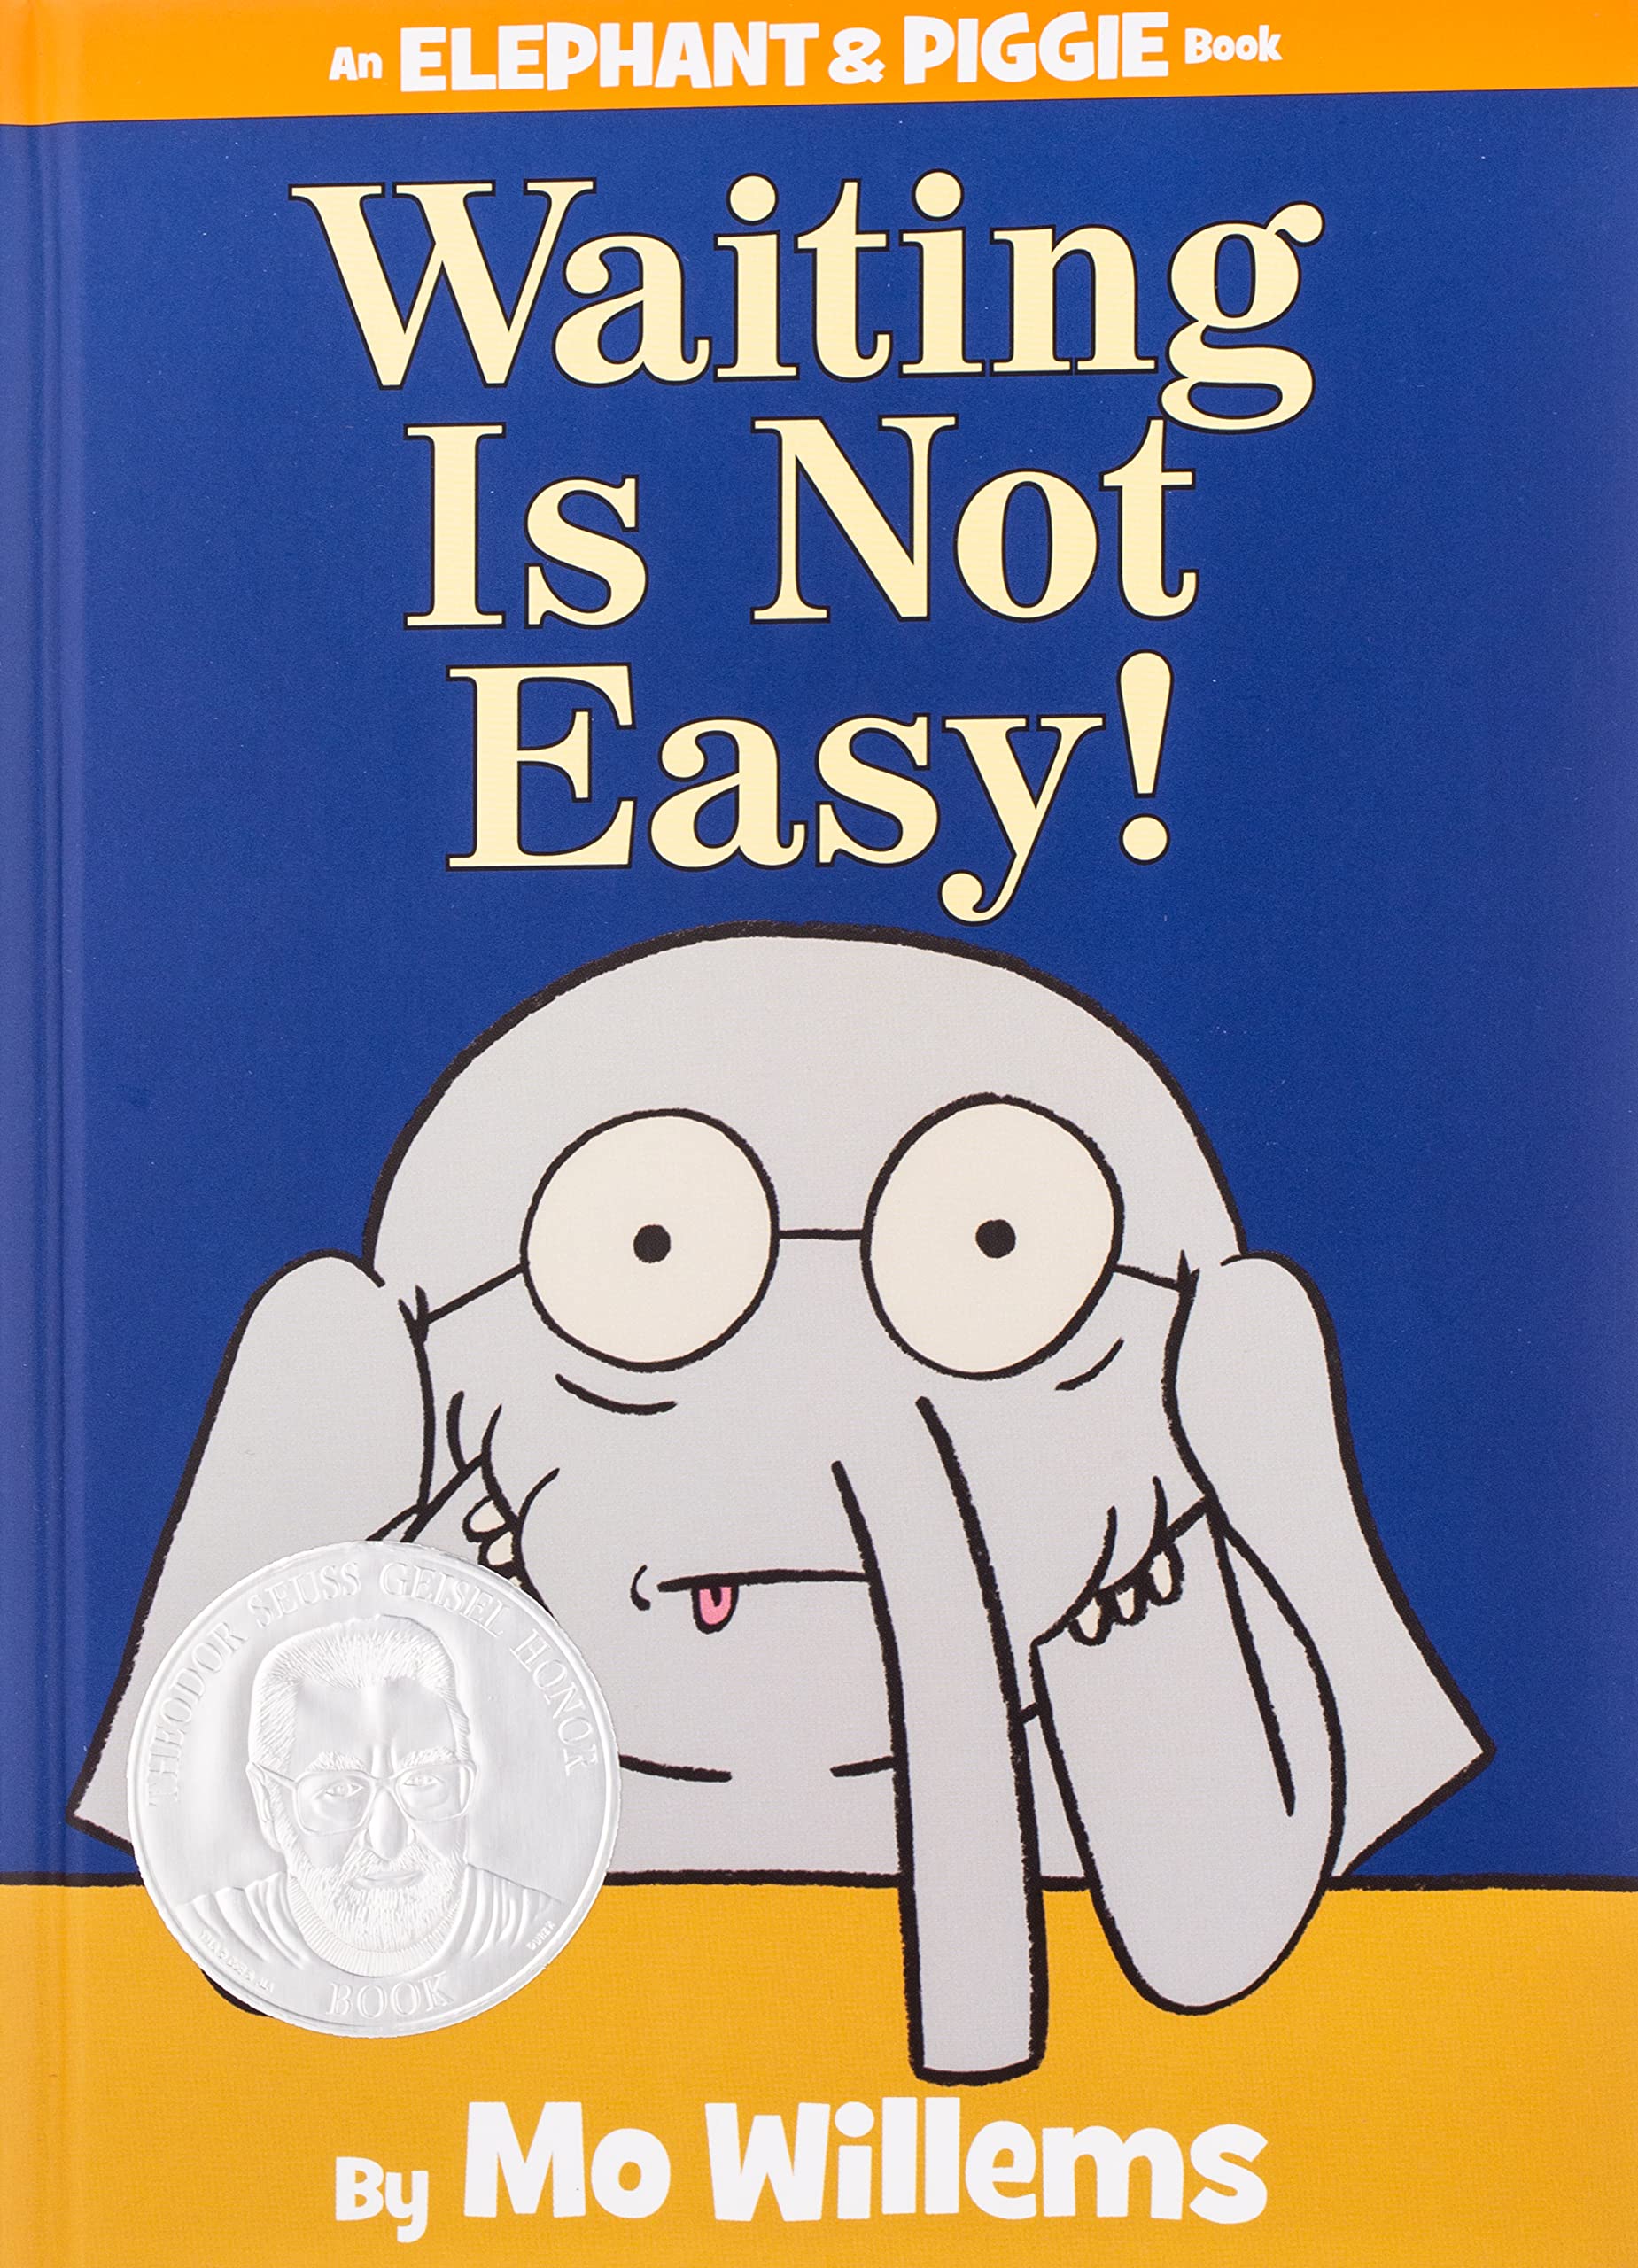 Waiting Is Not Easy! by Mo Willems